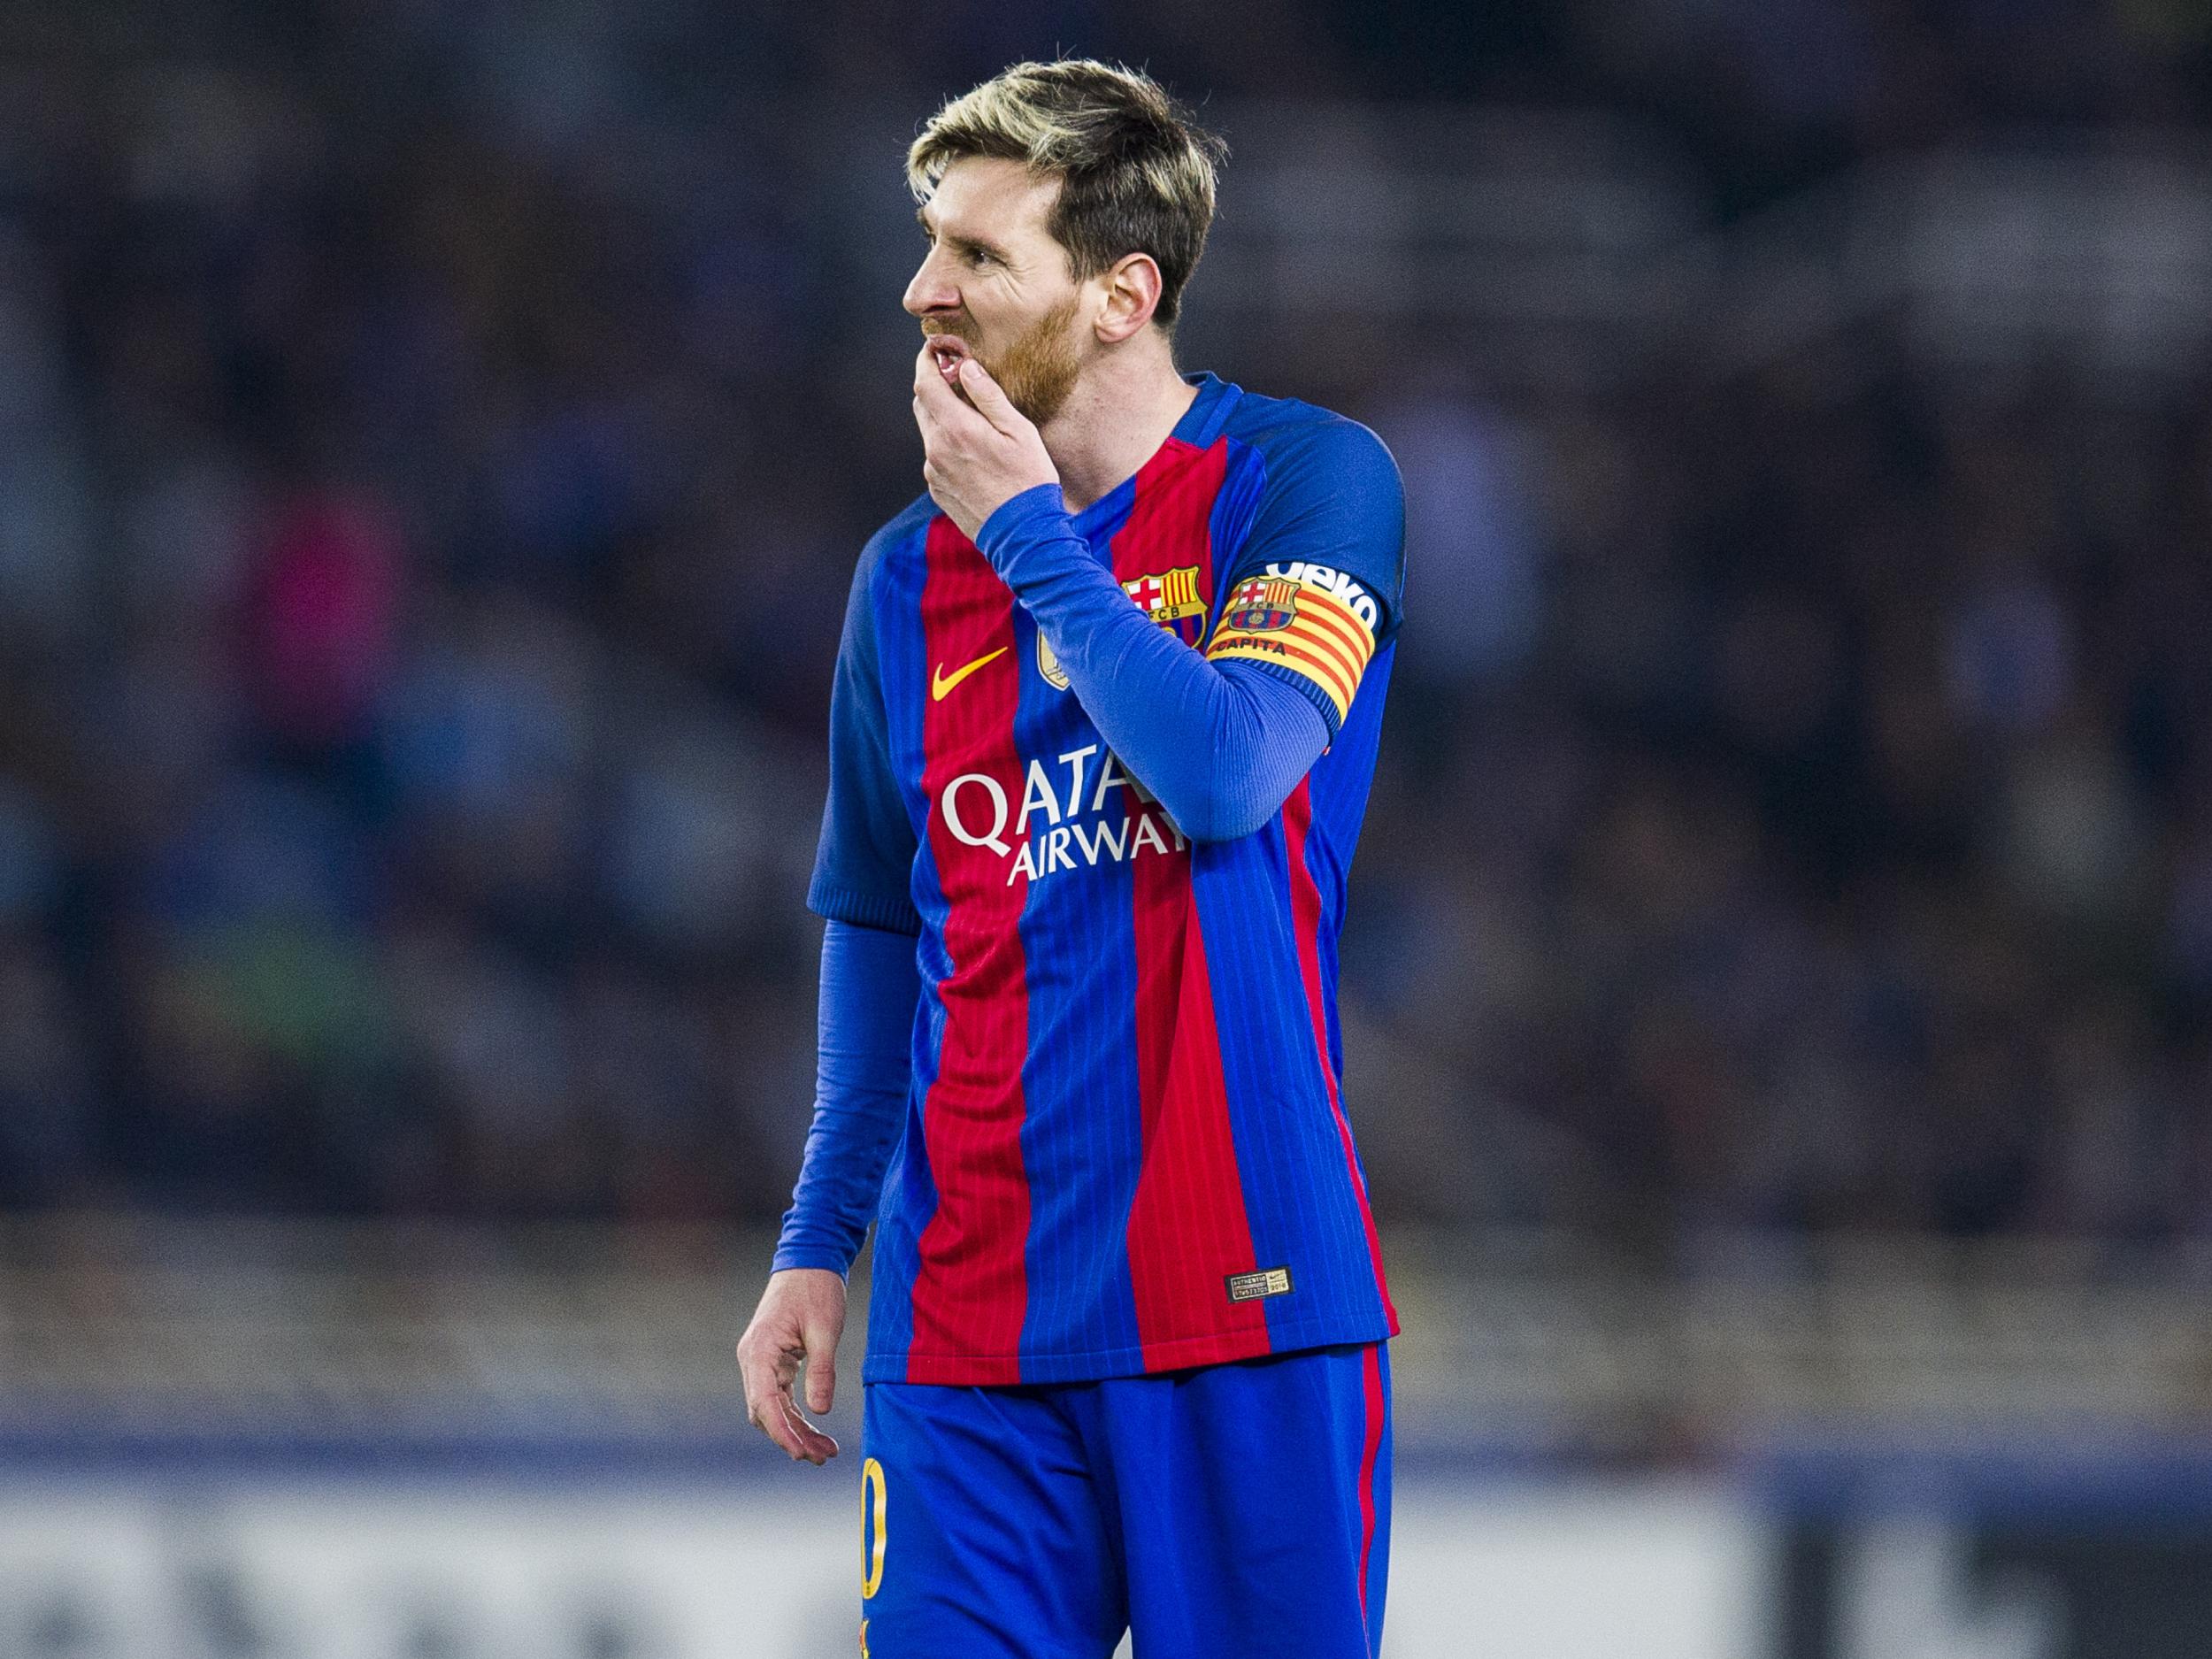 Lionel Messi was largely anonymous for the game